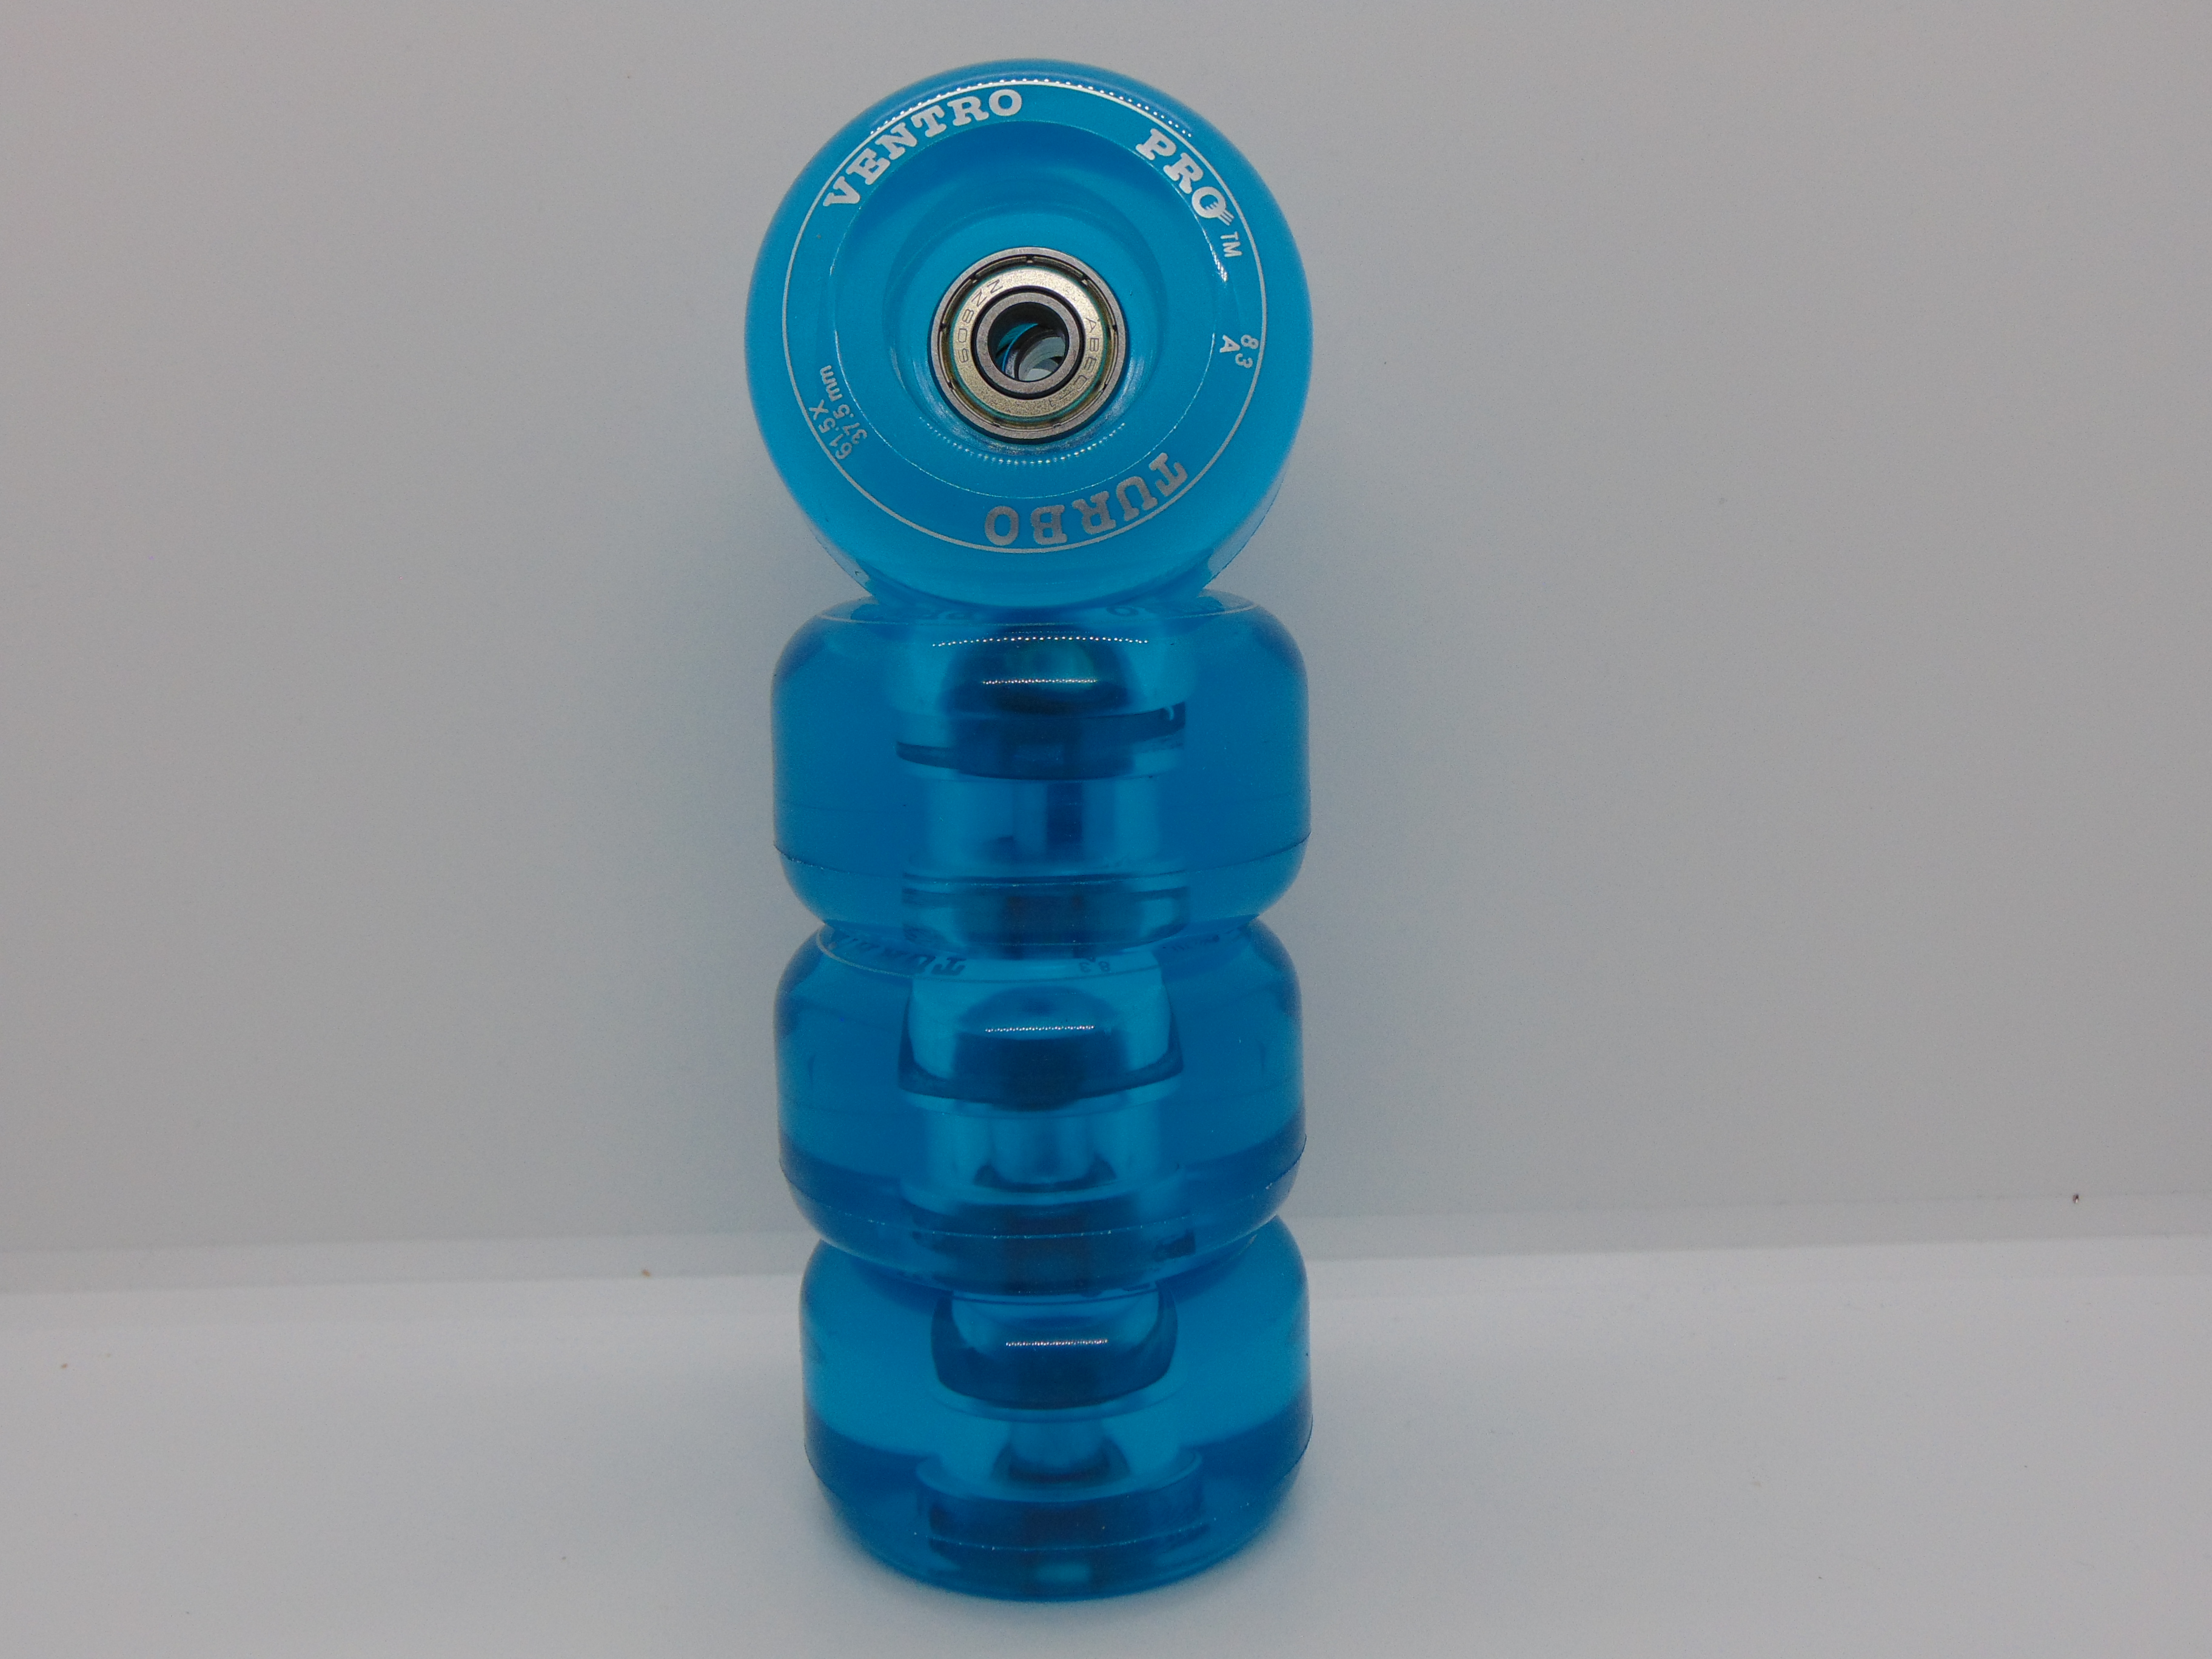 Ventro Pro Turbo Roller Skate Wheels Clear Teal Set of 4 or 8 Optional Bearings